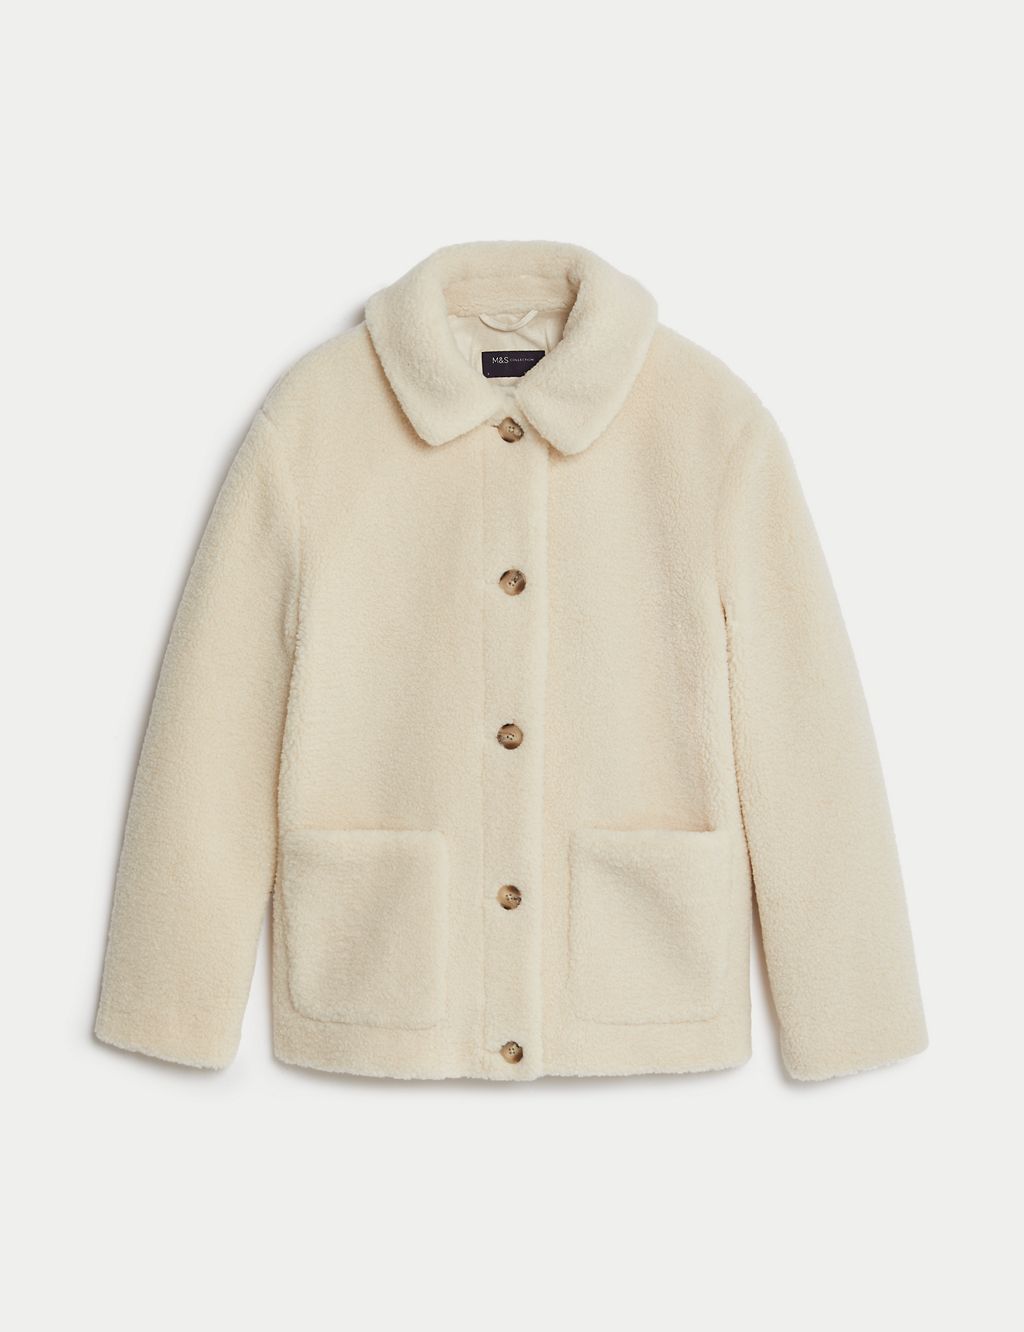 Teddy Textured Collared Jacket | M&S Collection | M&S